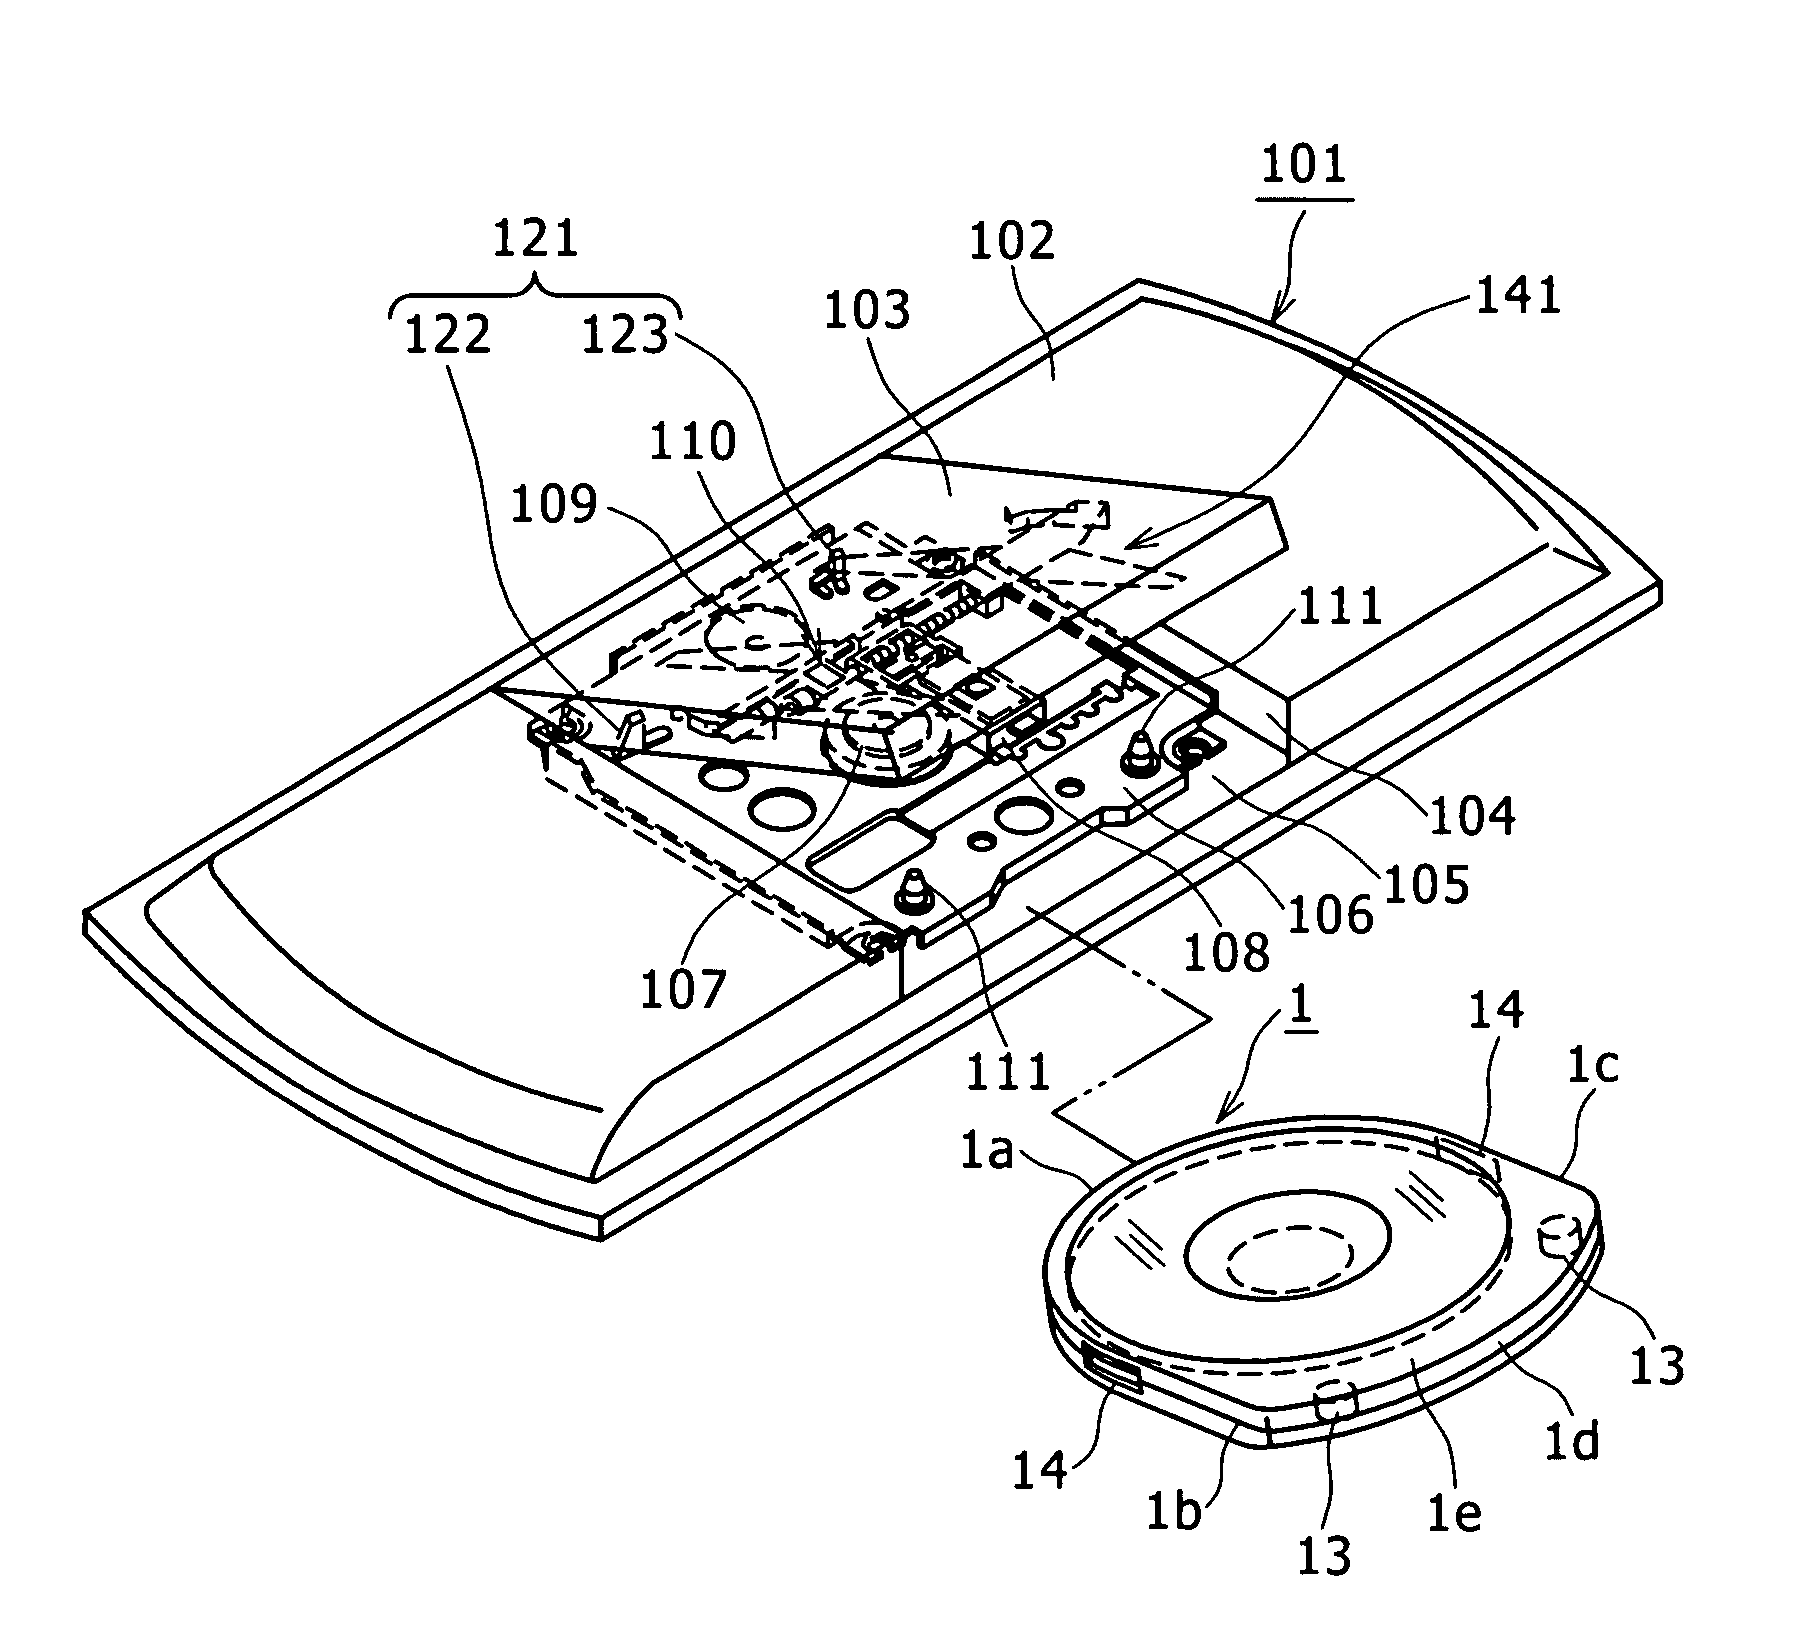 Reproducing device